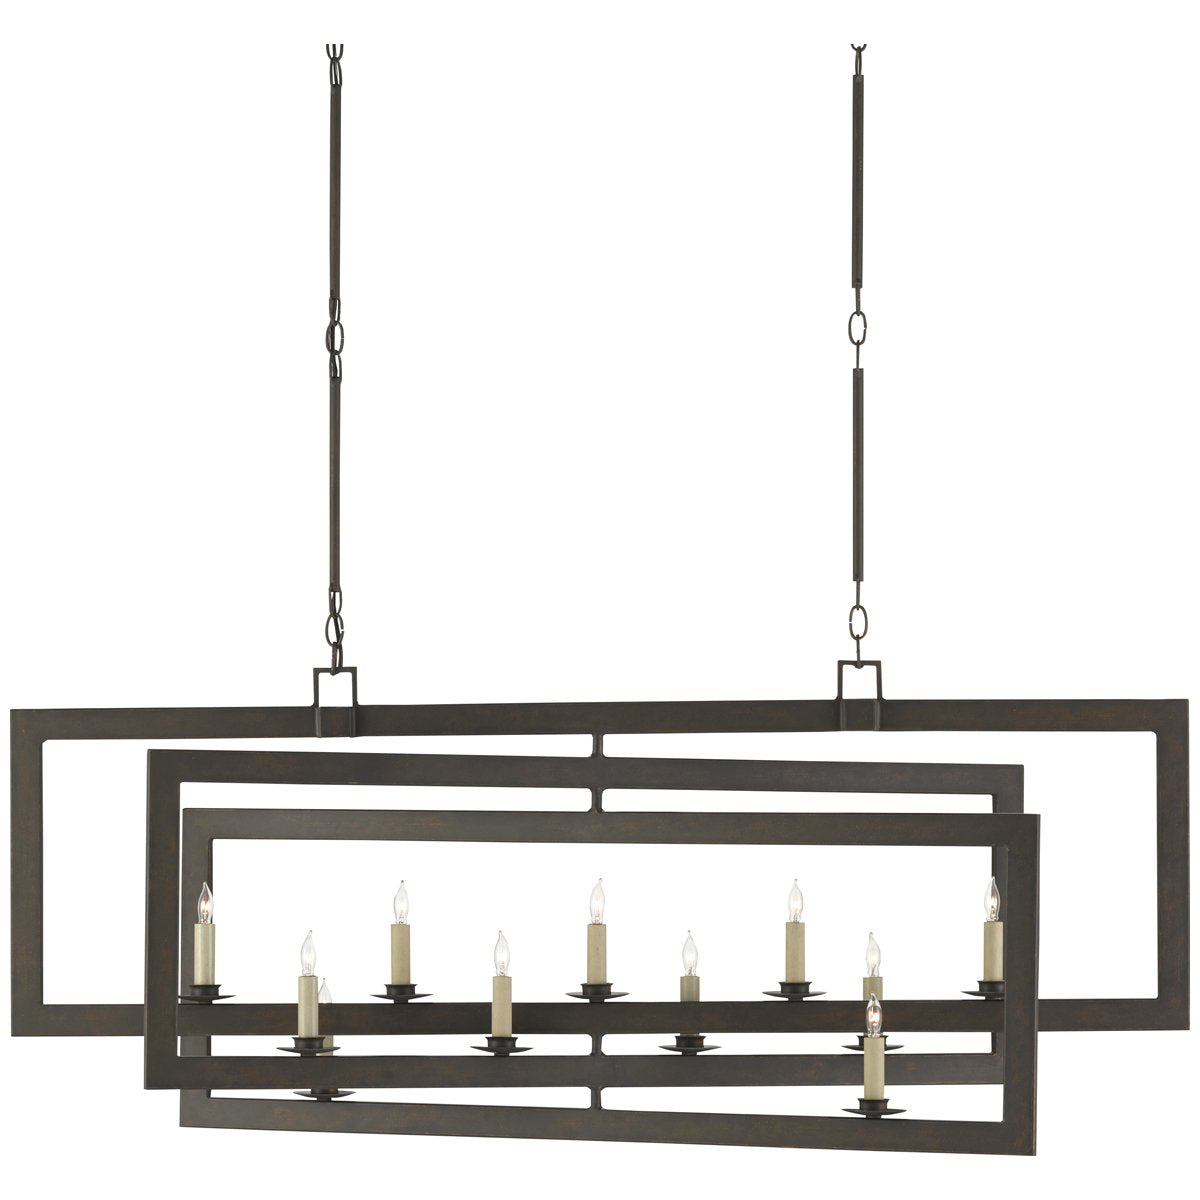 Currey and Company Middleton Rectangular Chandelier